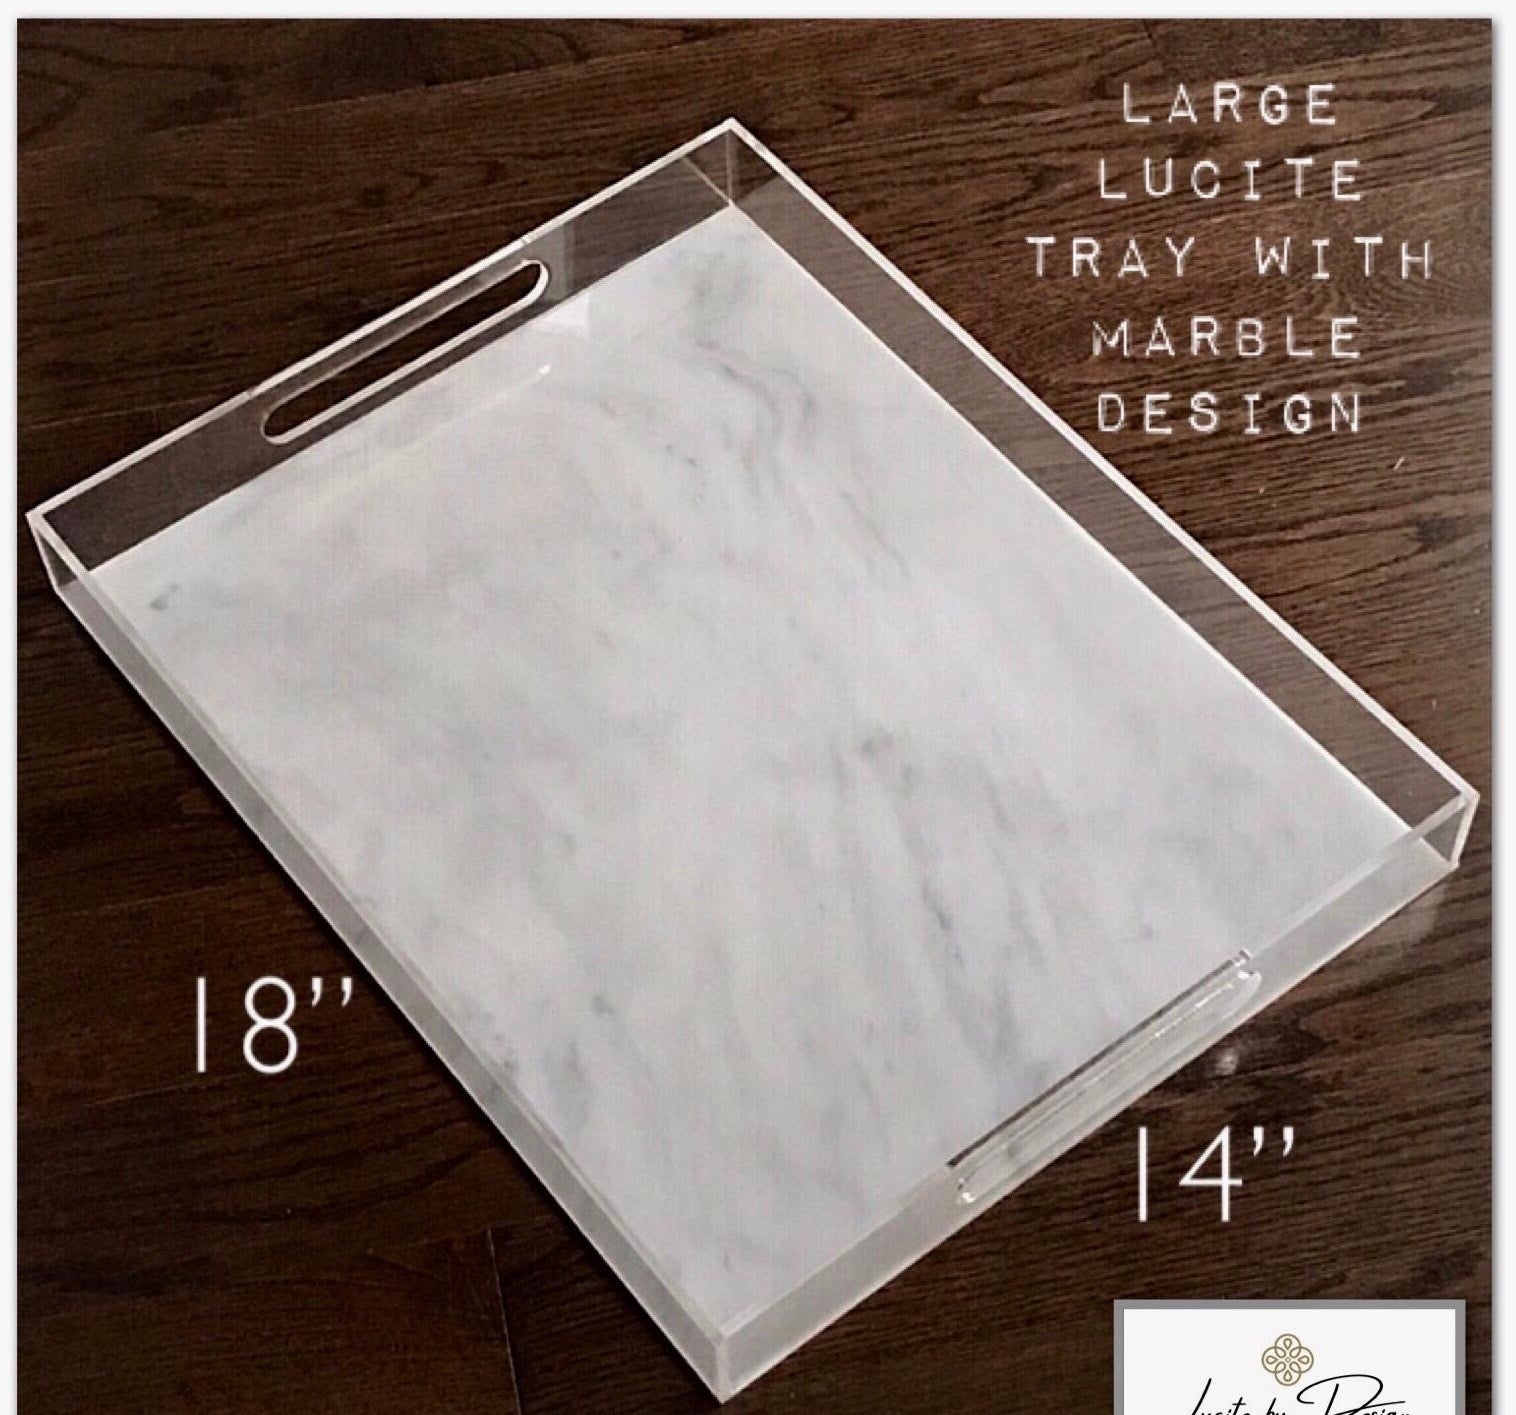 Lucite Marble Design Tray With Handles